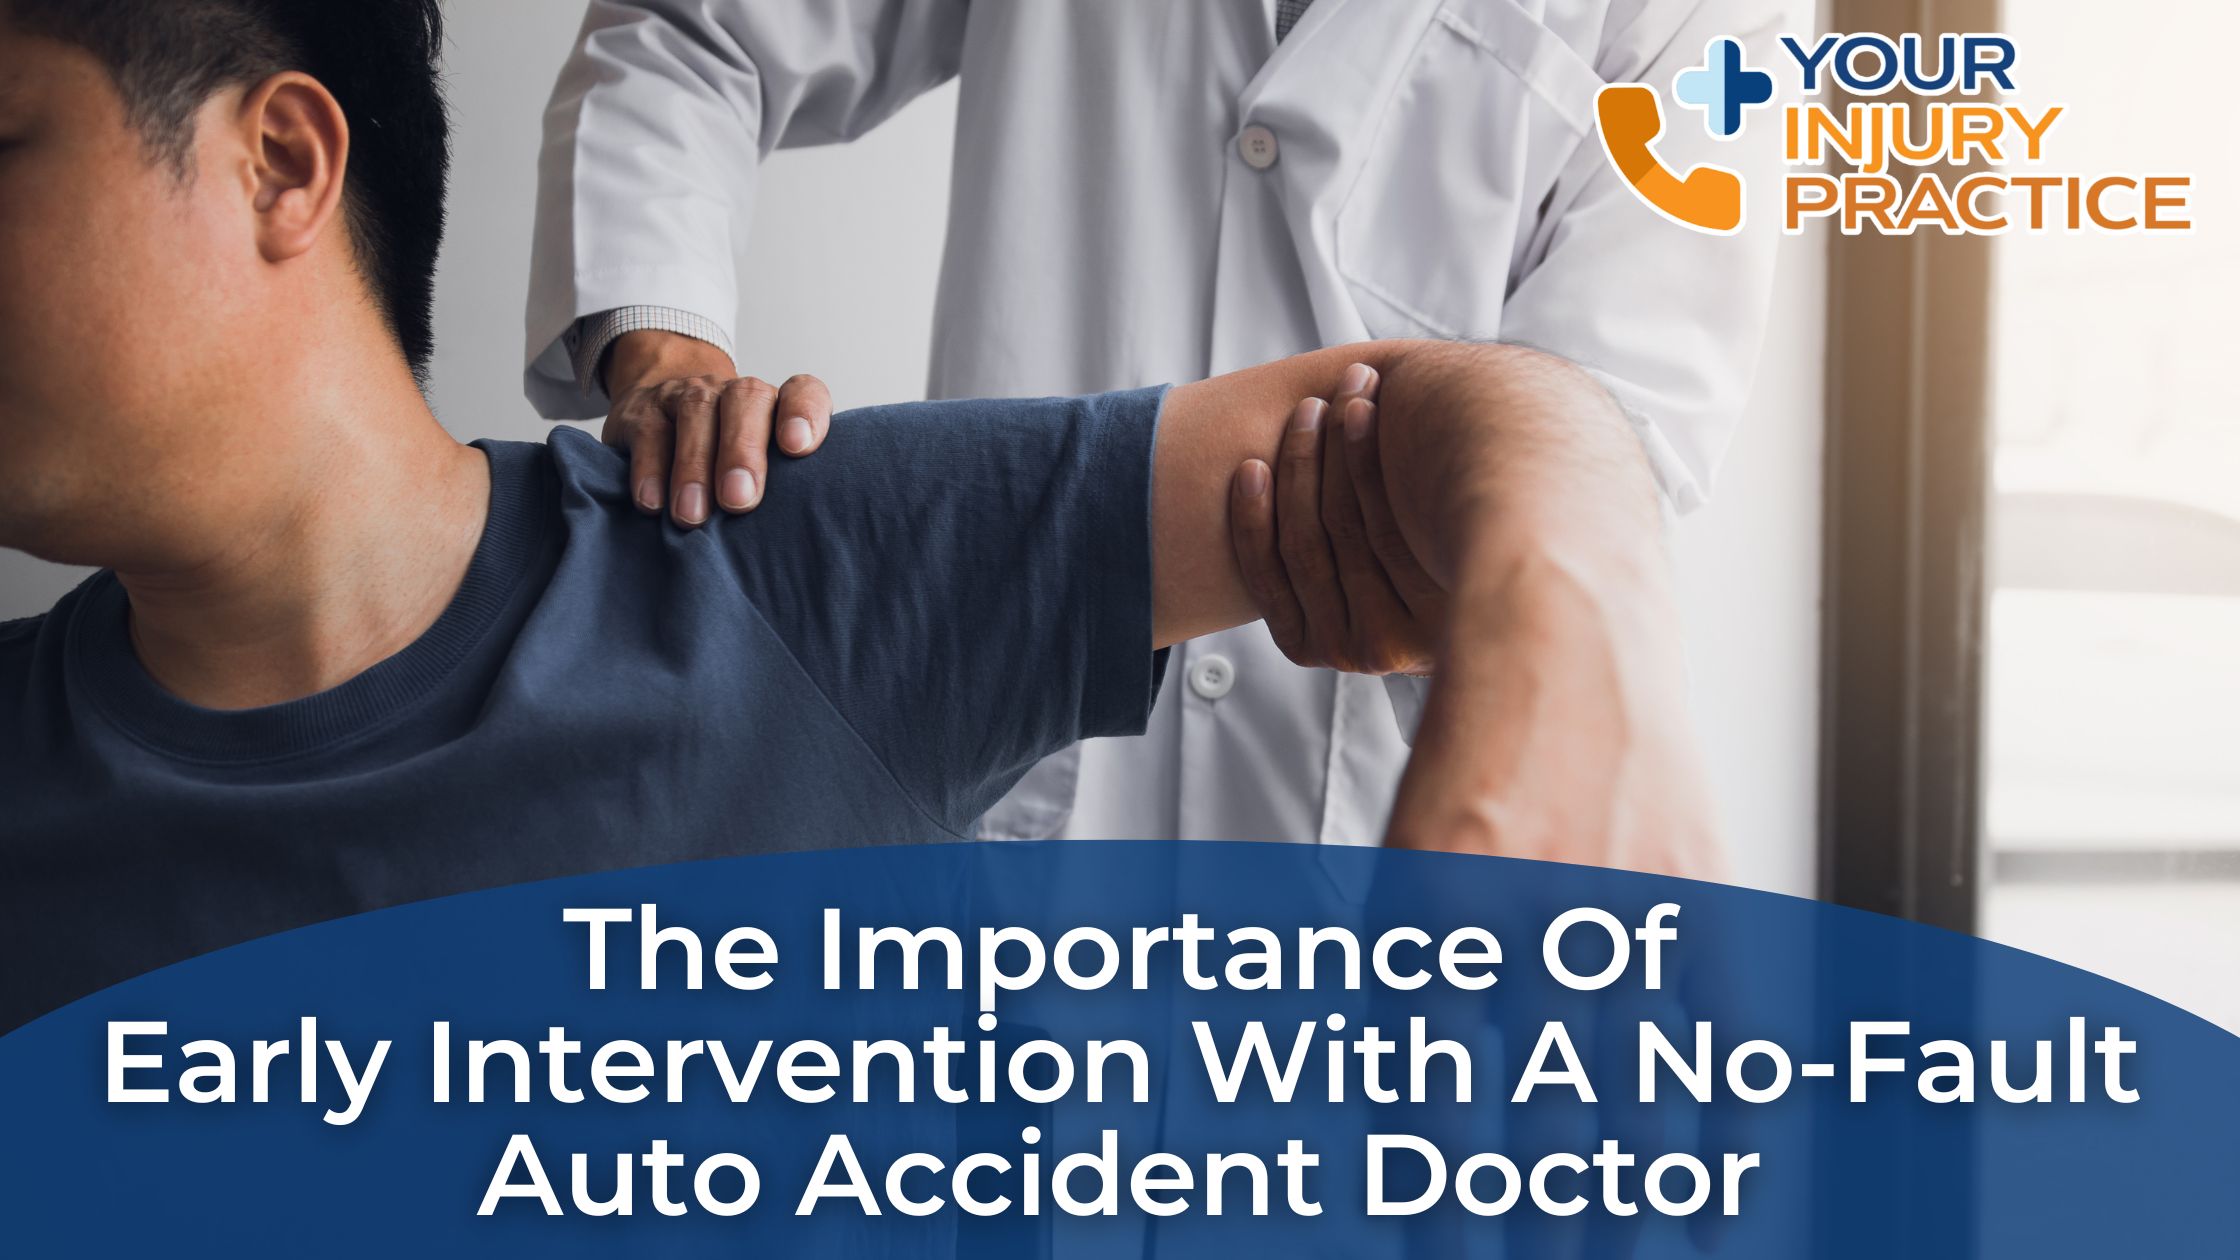 The Importance of Early Intervention with a No-Fault Auto Accident Doctor